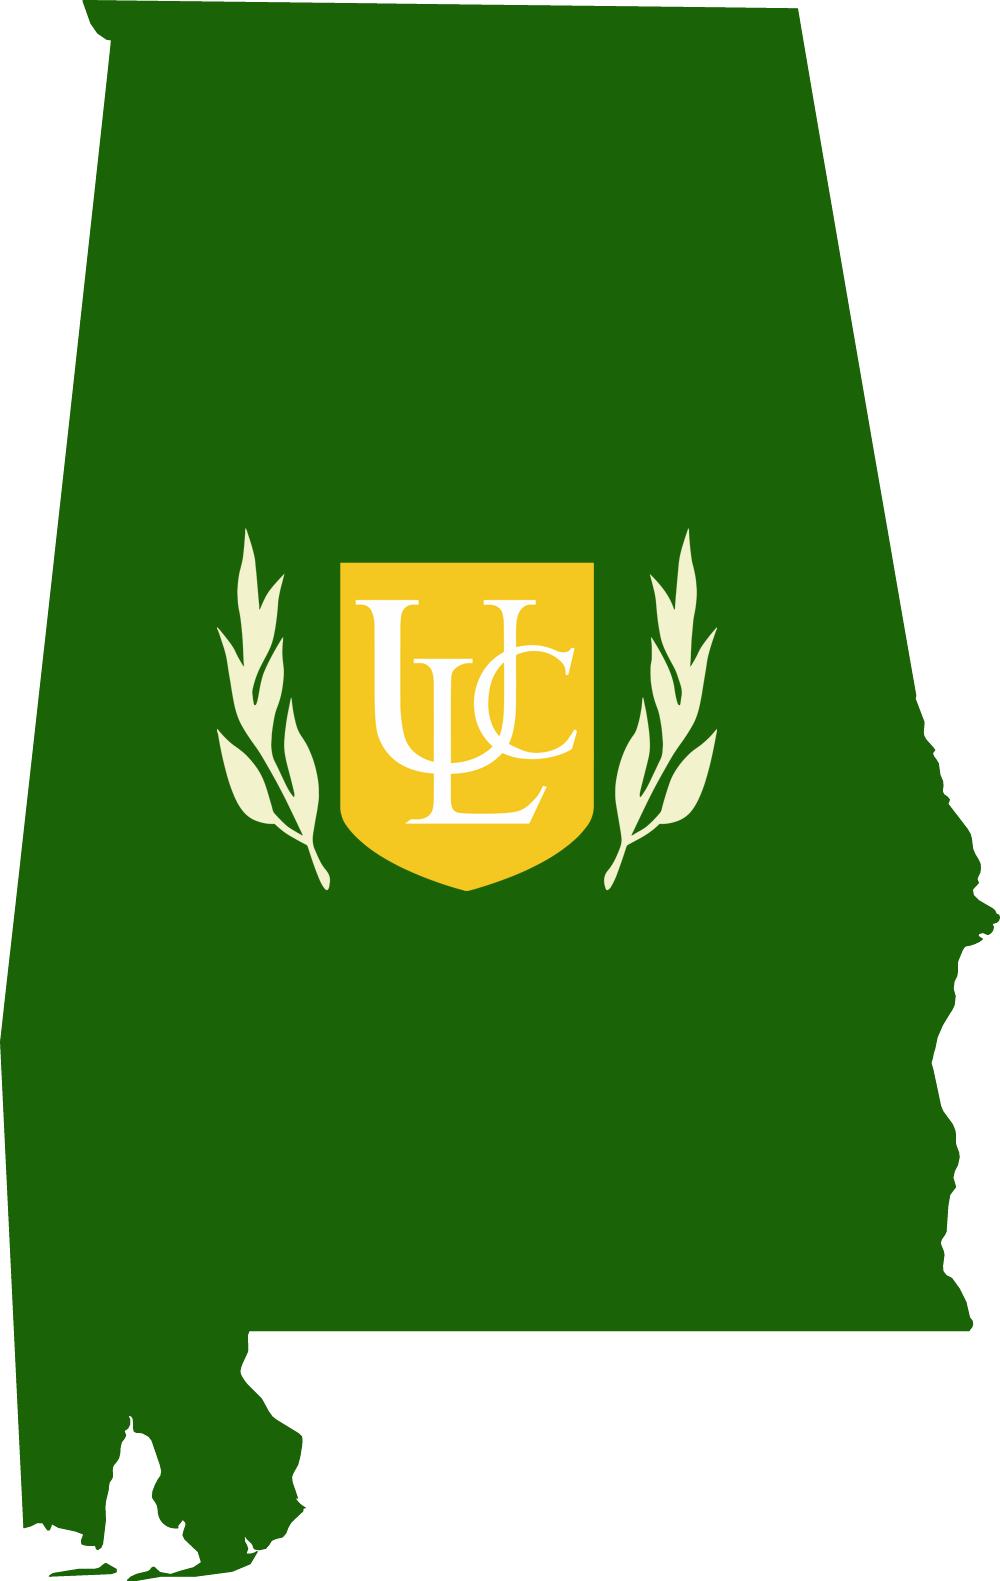 An outline of AL with the ULC logo